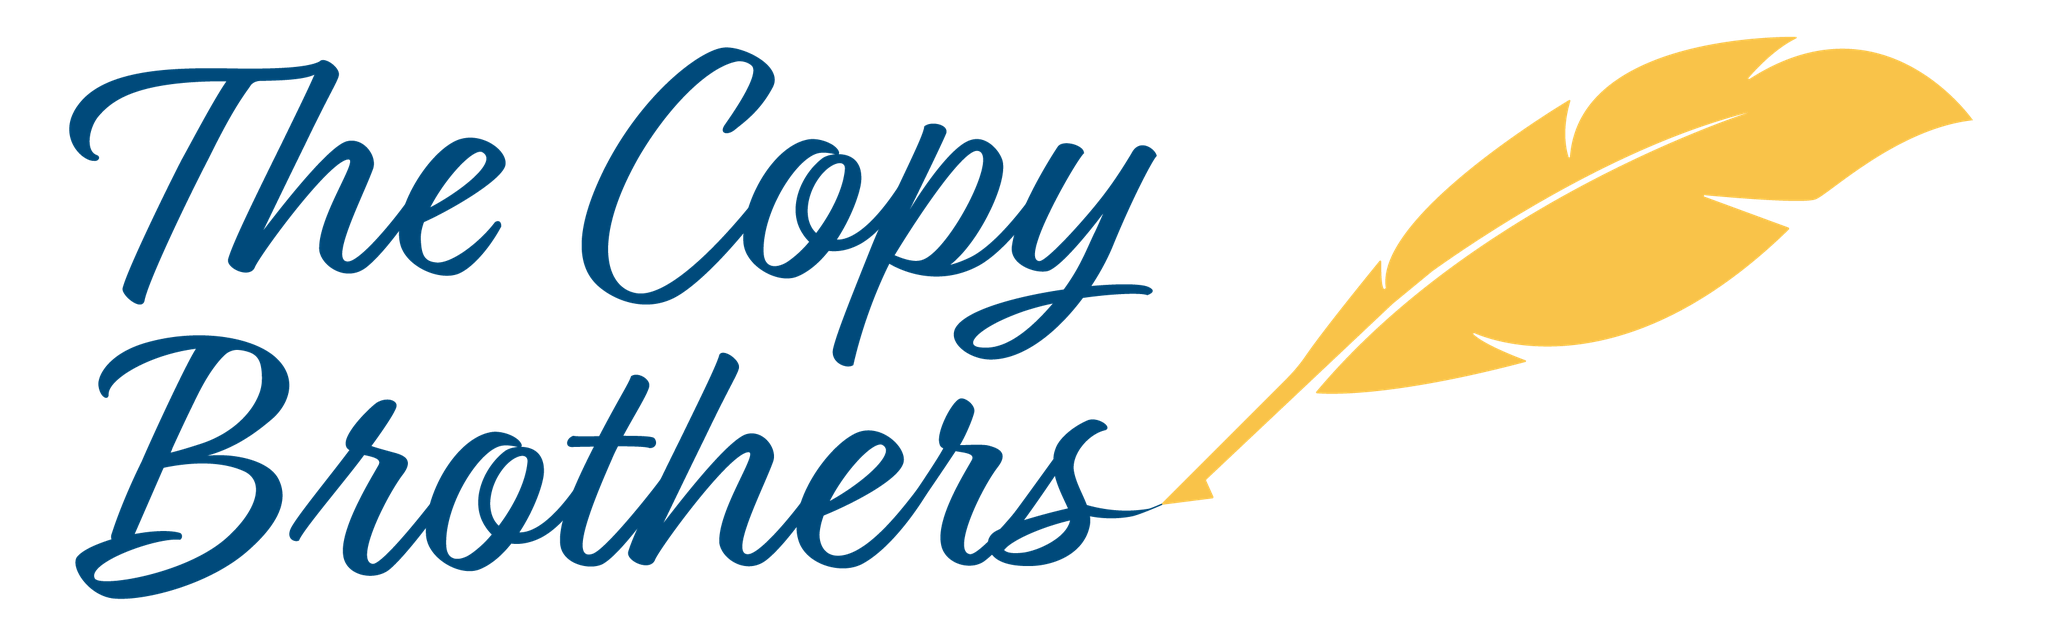 The Copy Brothers Logo